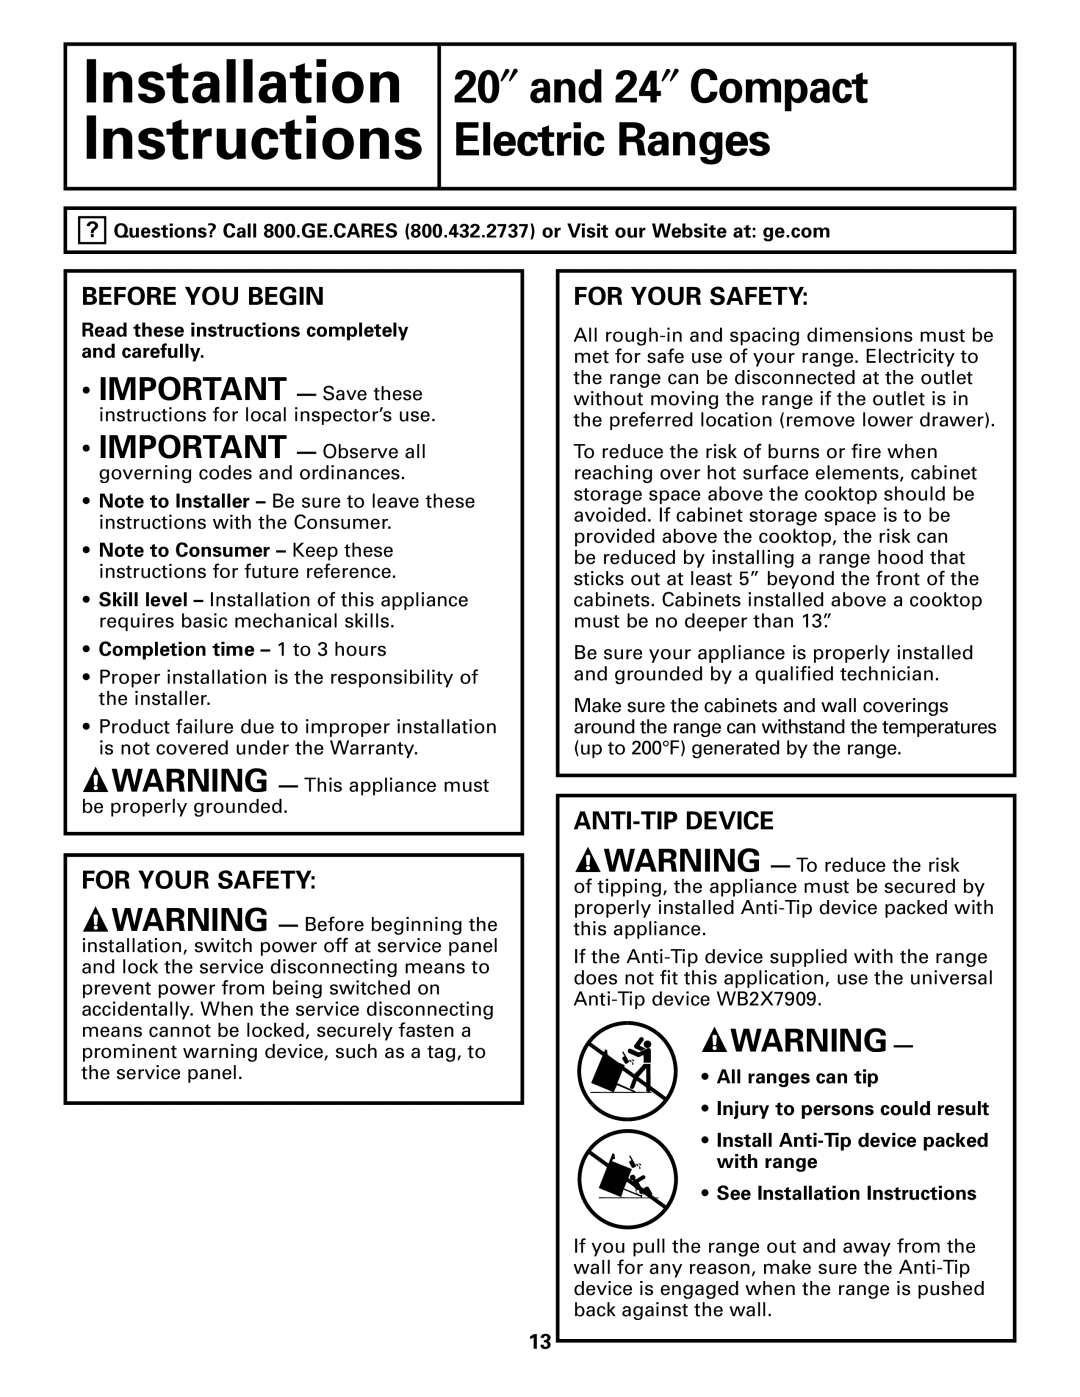 Hotpoint RA720, RA724 Before You Begin, For Your Safety, Anti-Tipdevice, Read these instructions completely and carefully 